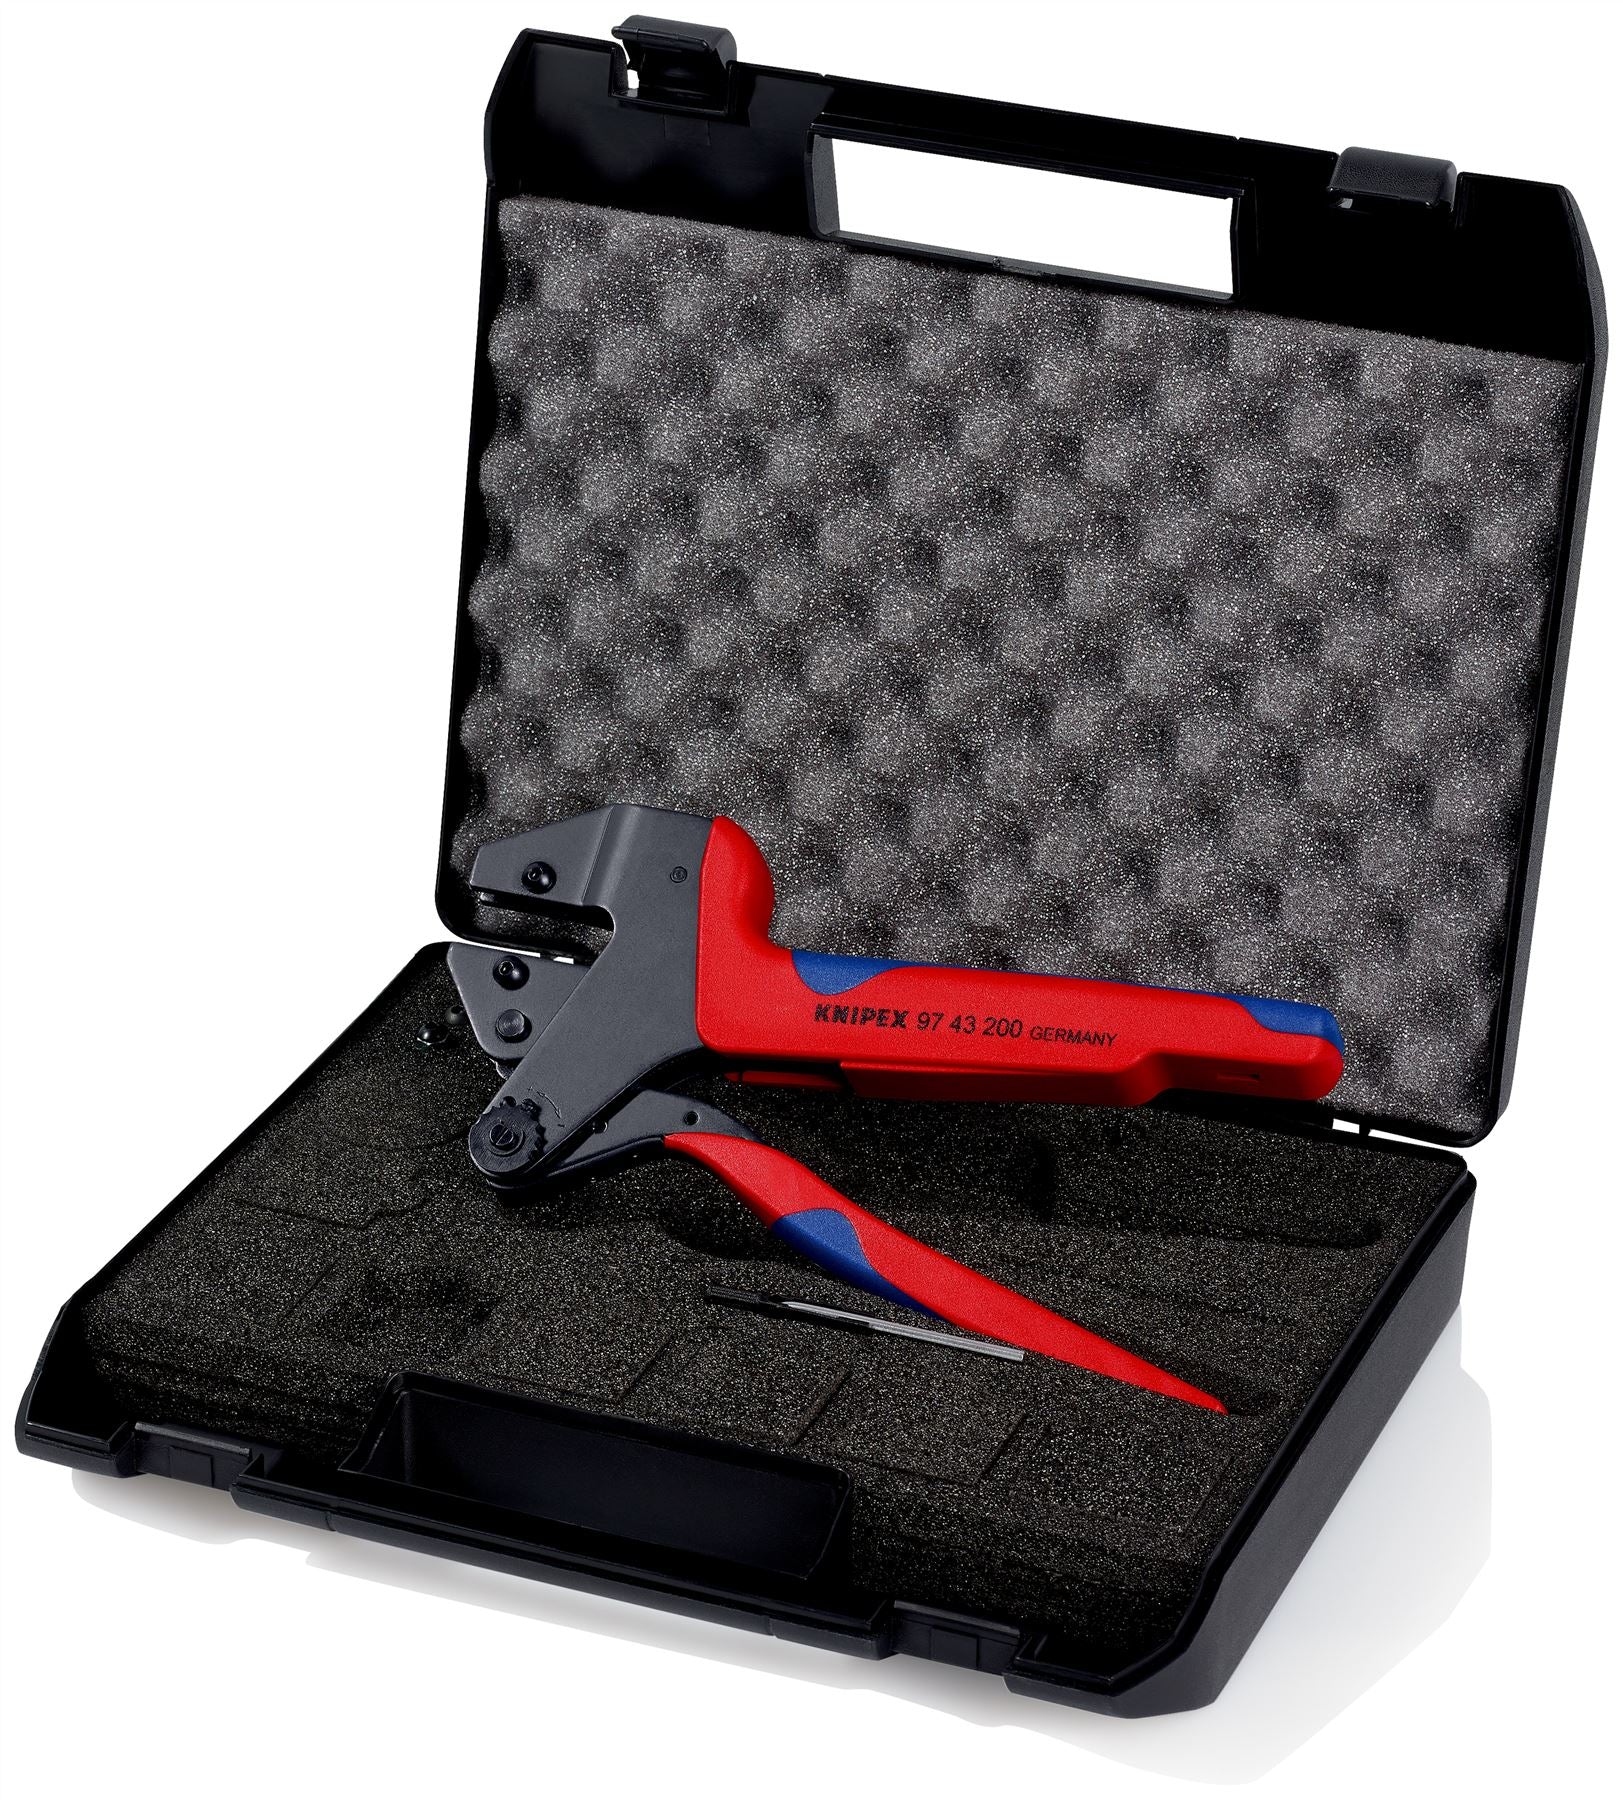 KNIPEX Crimp System Pliers in Plastic Case with Foam Insert without Crimping Dies 200mm 97 43 200